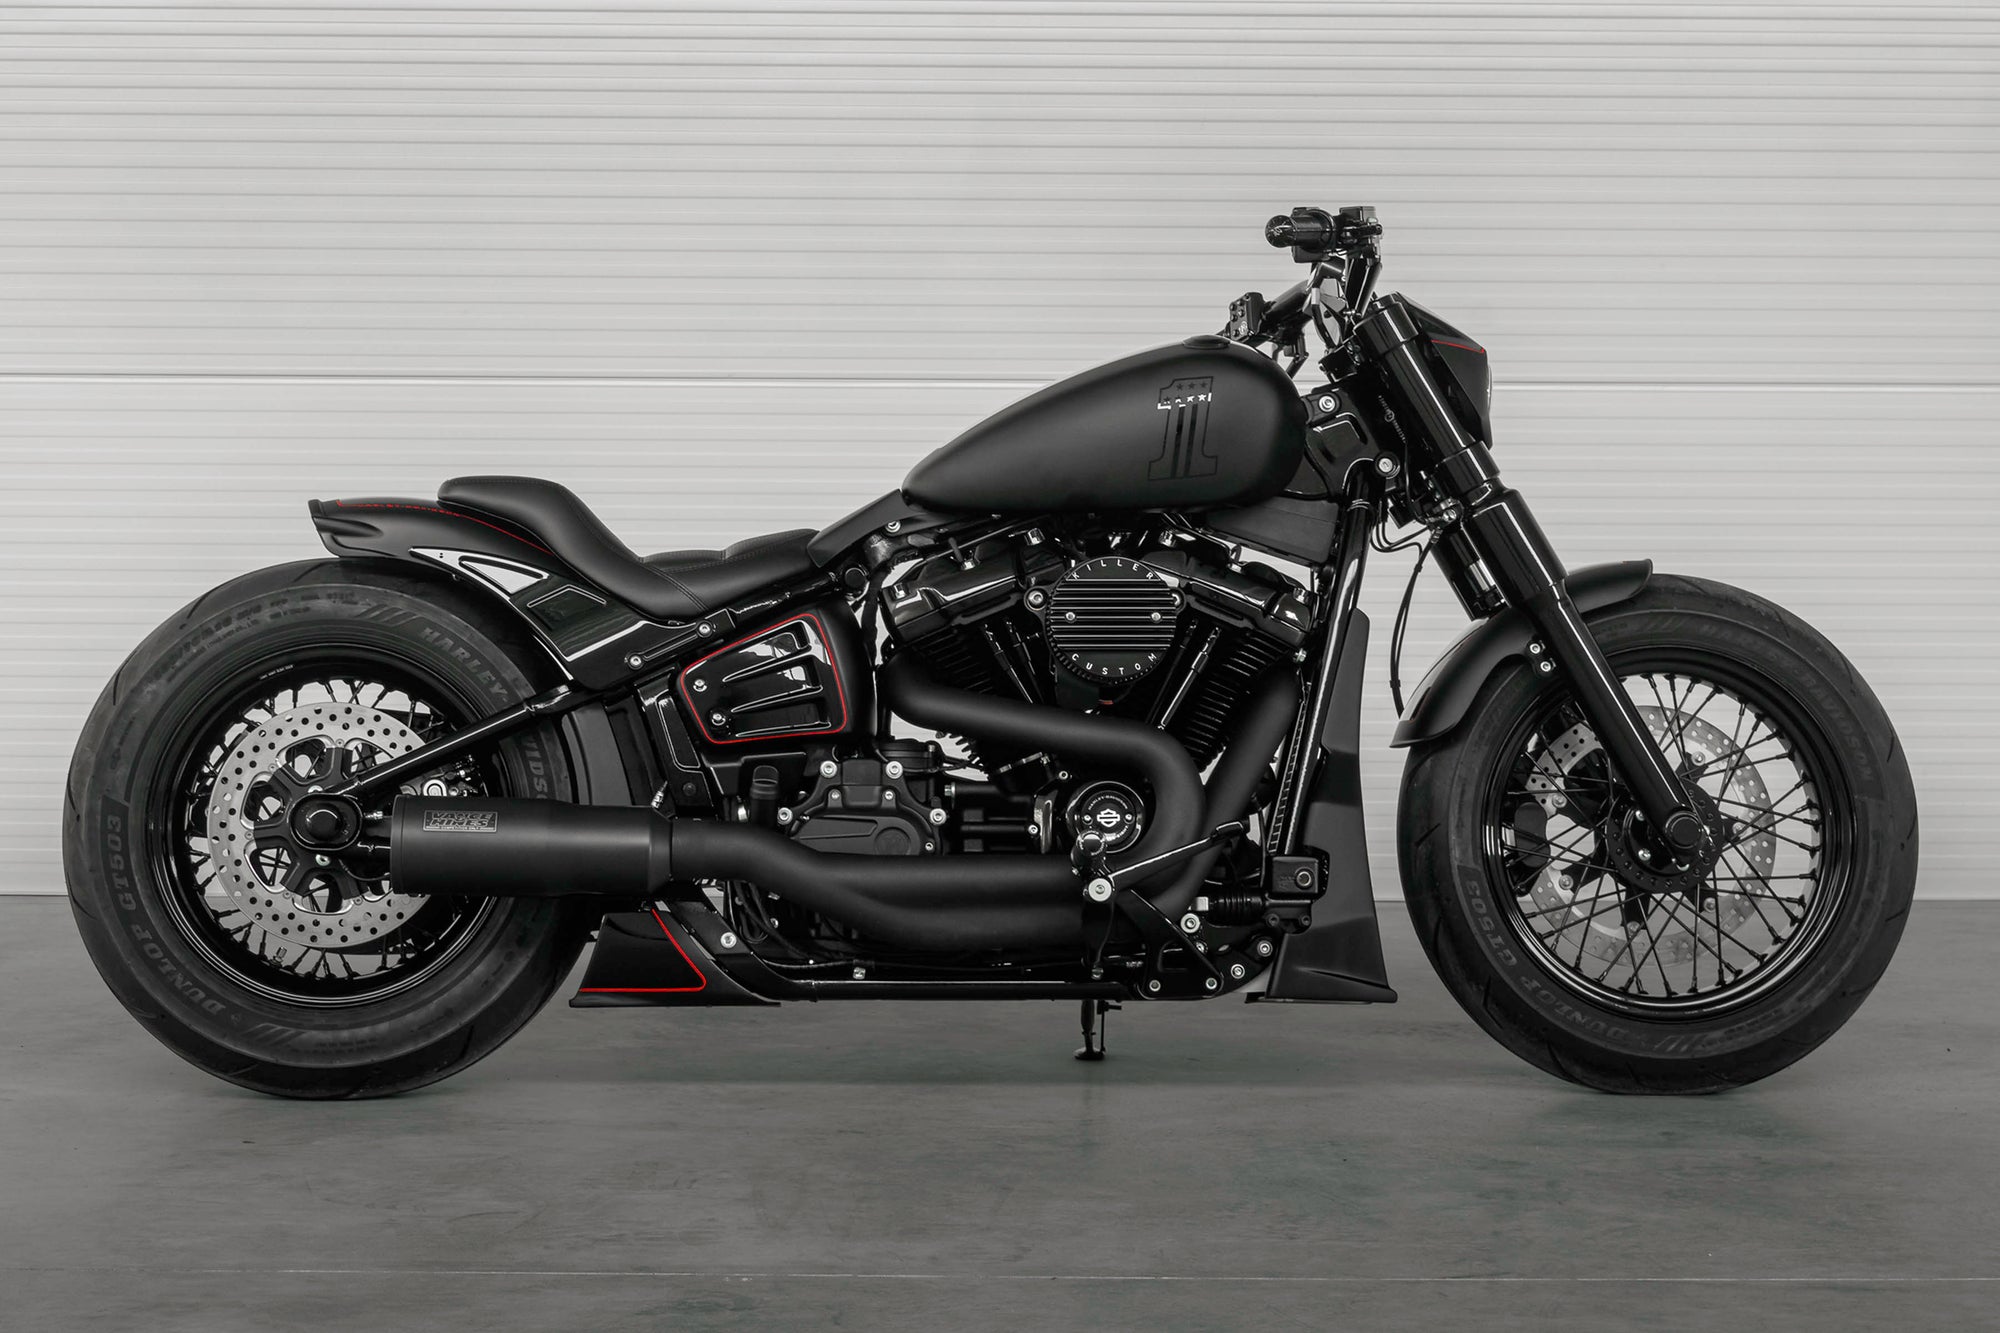 Harley Davidson motorcycle with Killer Custom parts from the side in a modern white garage